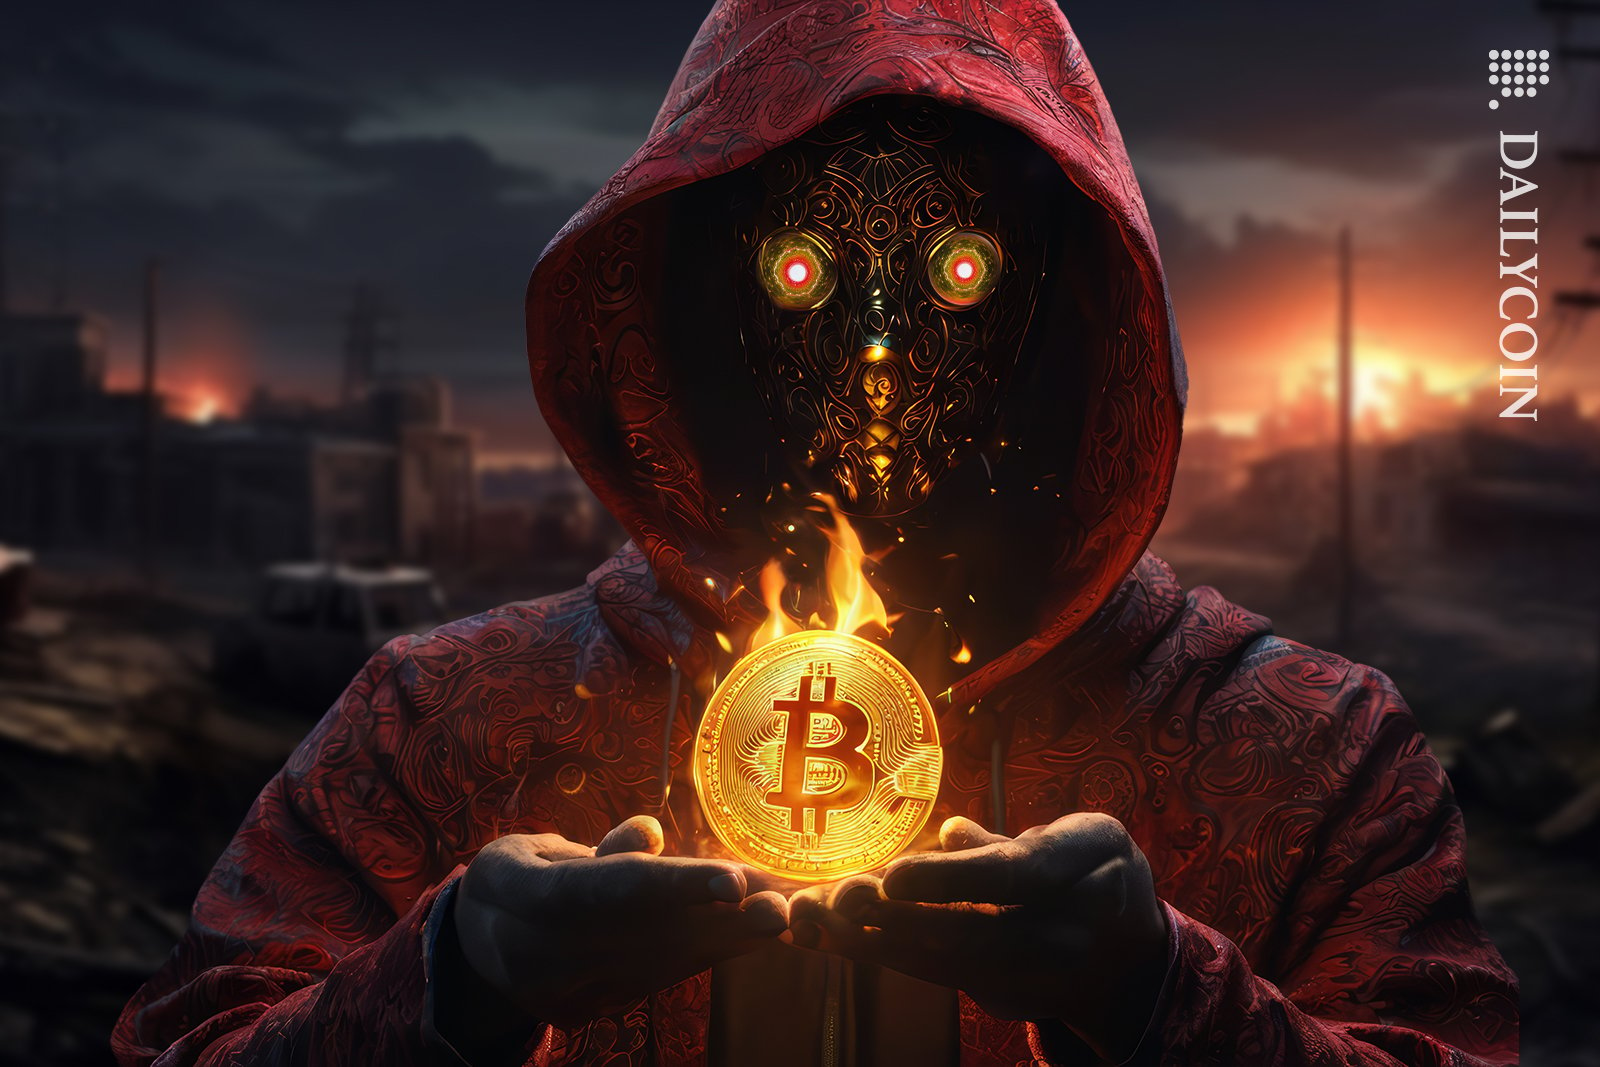 Masked guy holding a bitcoin on fire in a warzone land.